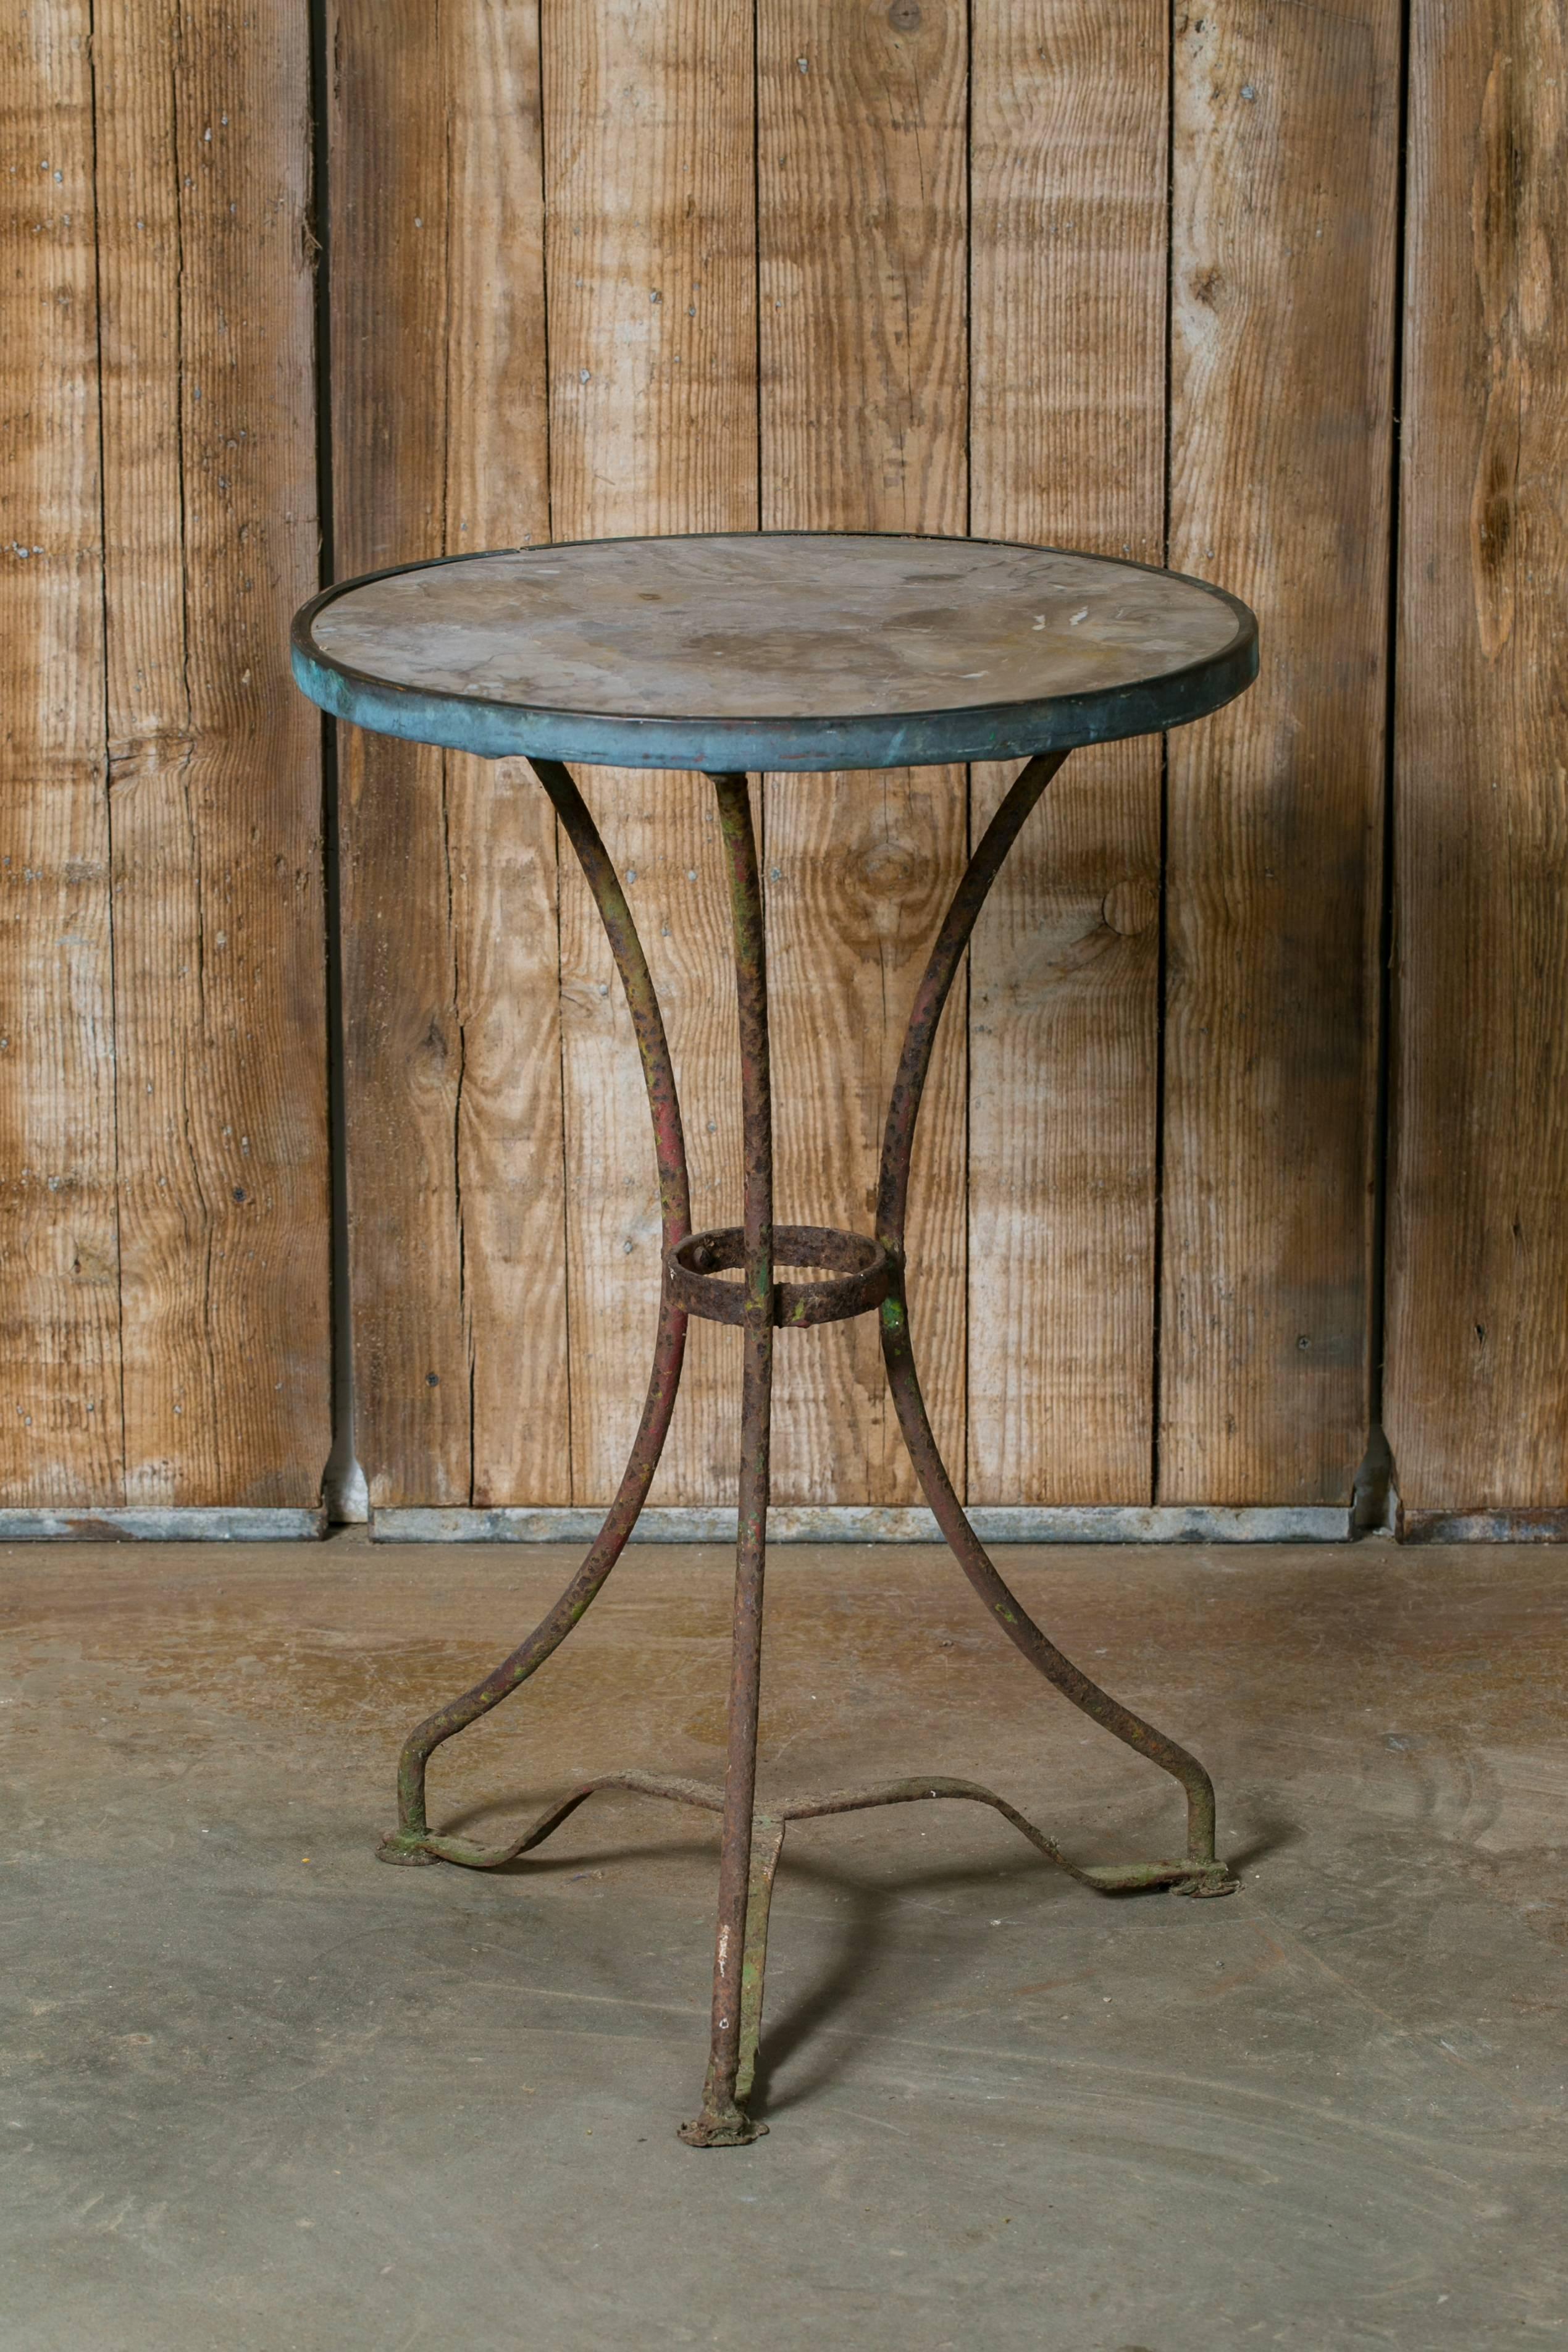 Antique Gueridon table with original marble top, brass band and iron base. From France, circa 1910. Would make a great bedside table. Beautiful verde patina on the brass band with wonderful crusty texture on the iron base.